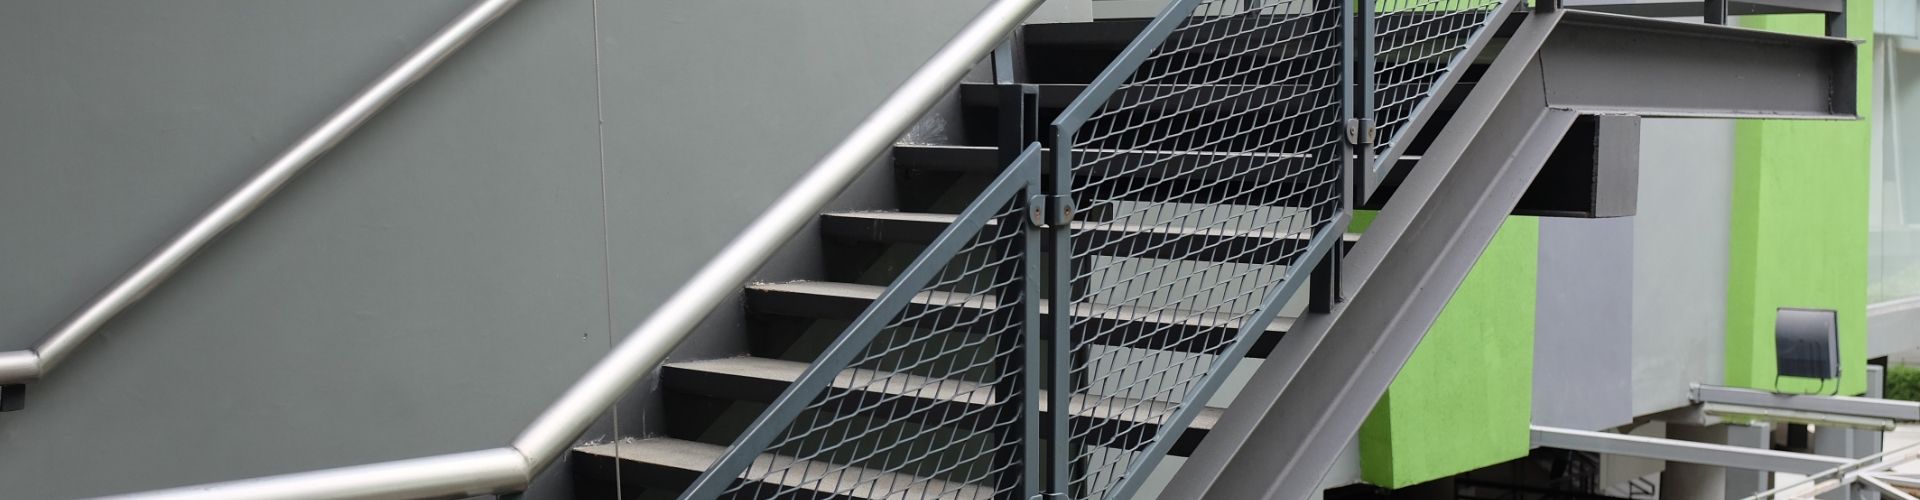 Outdoor railings are made of expanded metal infill panels.